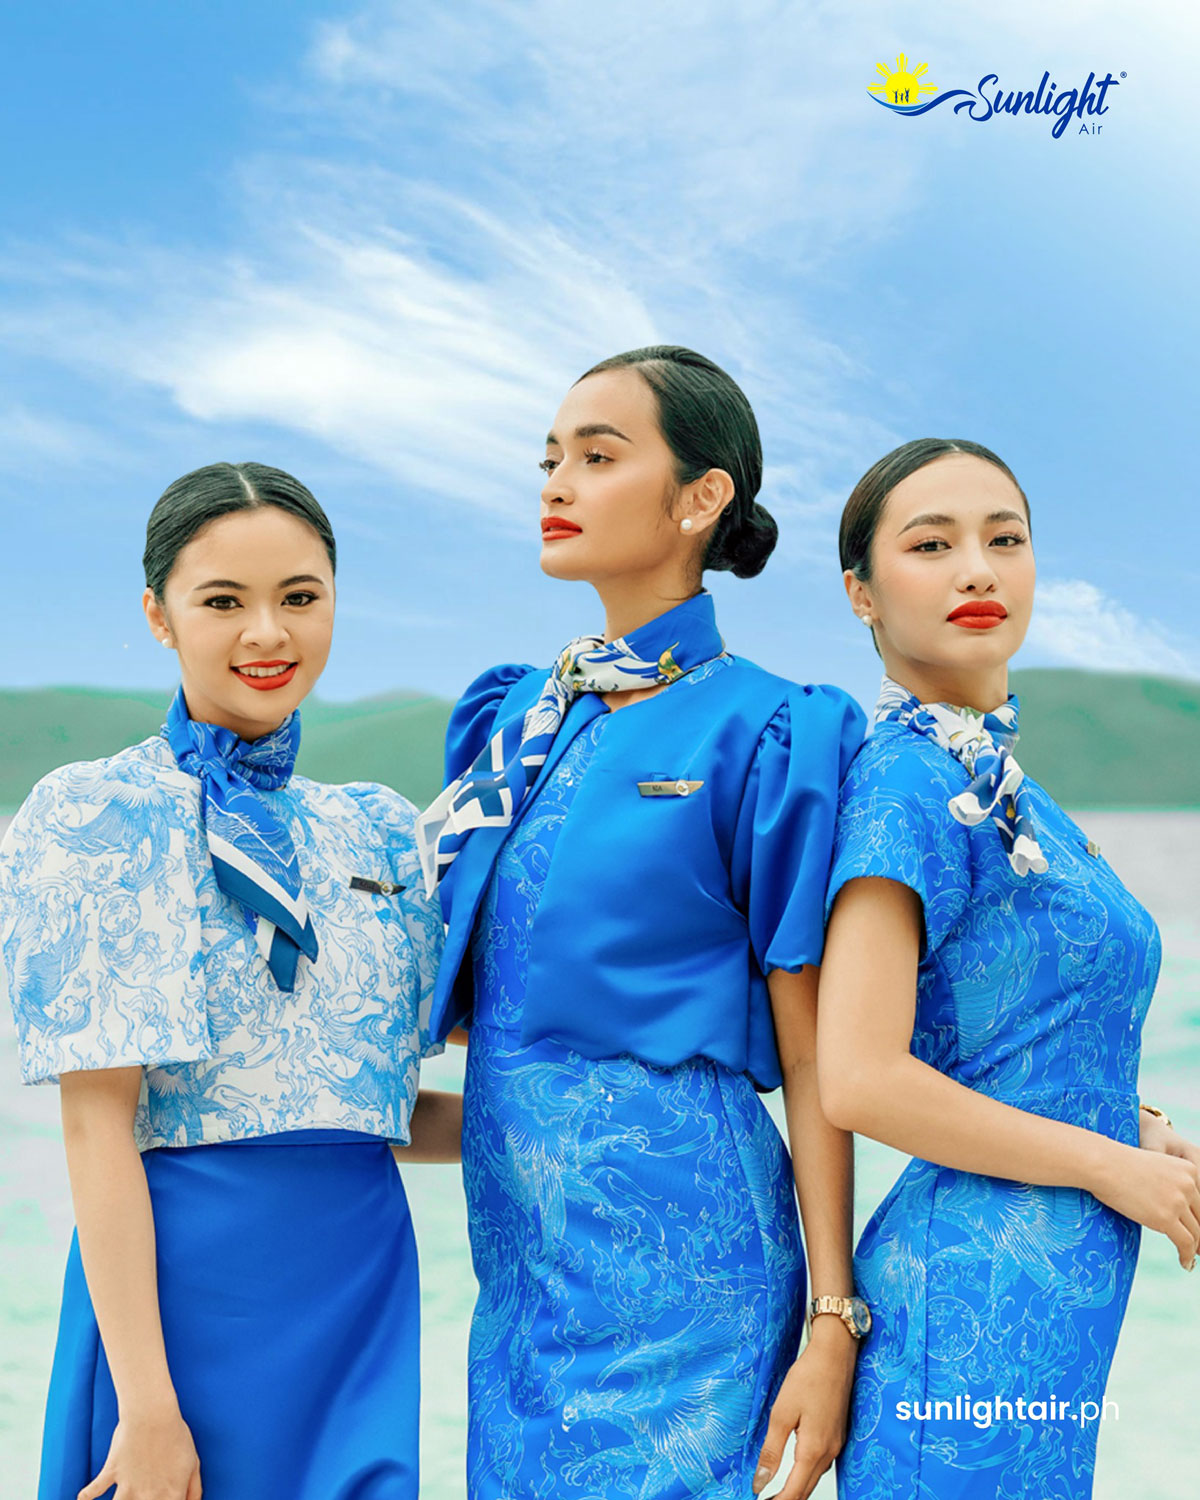 Sunlight Air, in the Philippines is looking for Cabin Crew